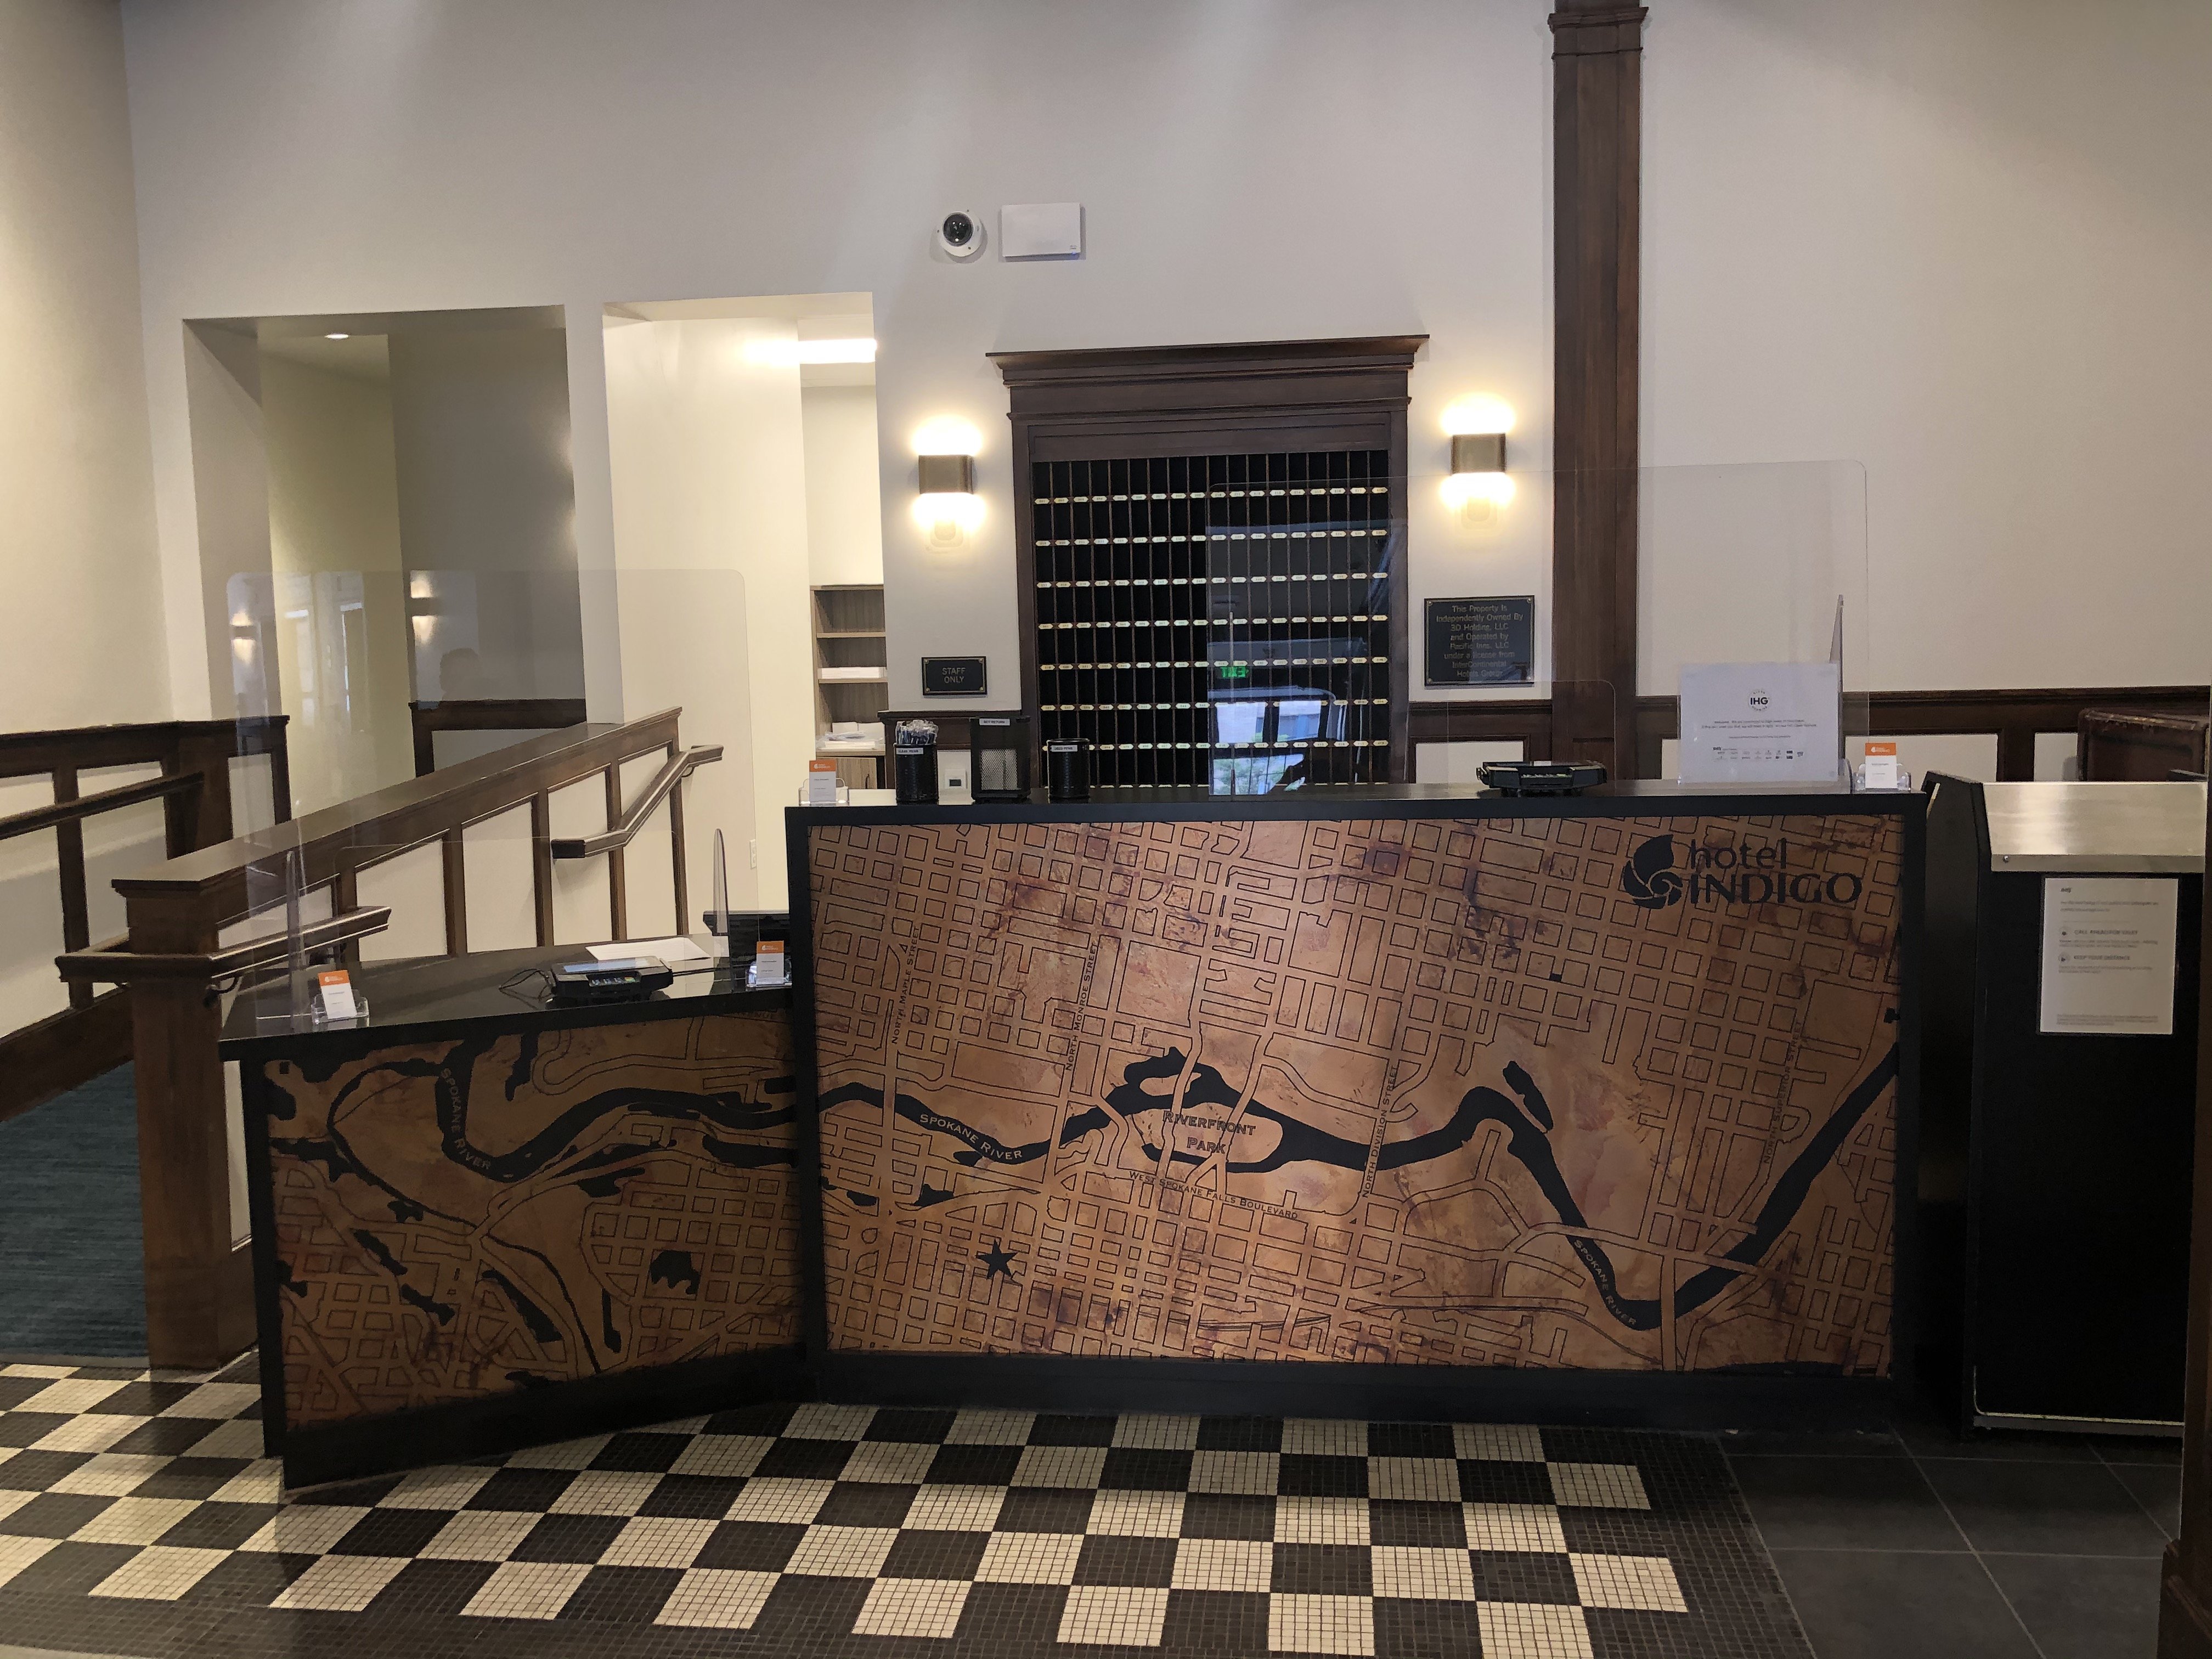 Your journey begins at the Hotel Indigo Downtown Spokane